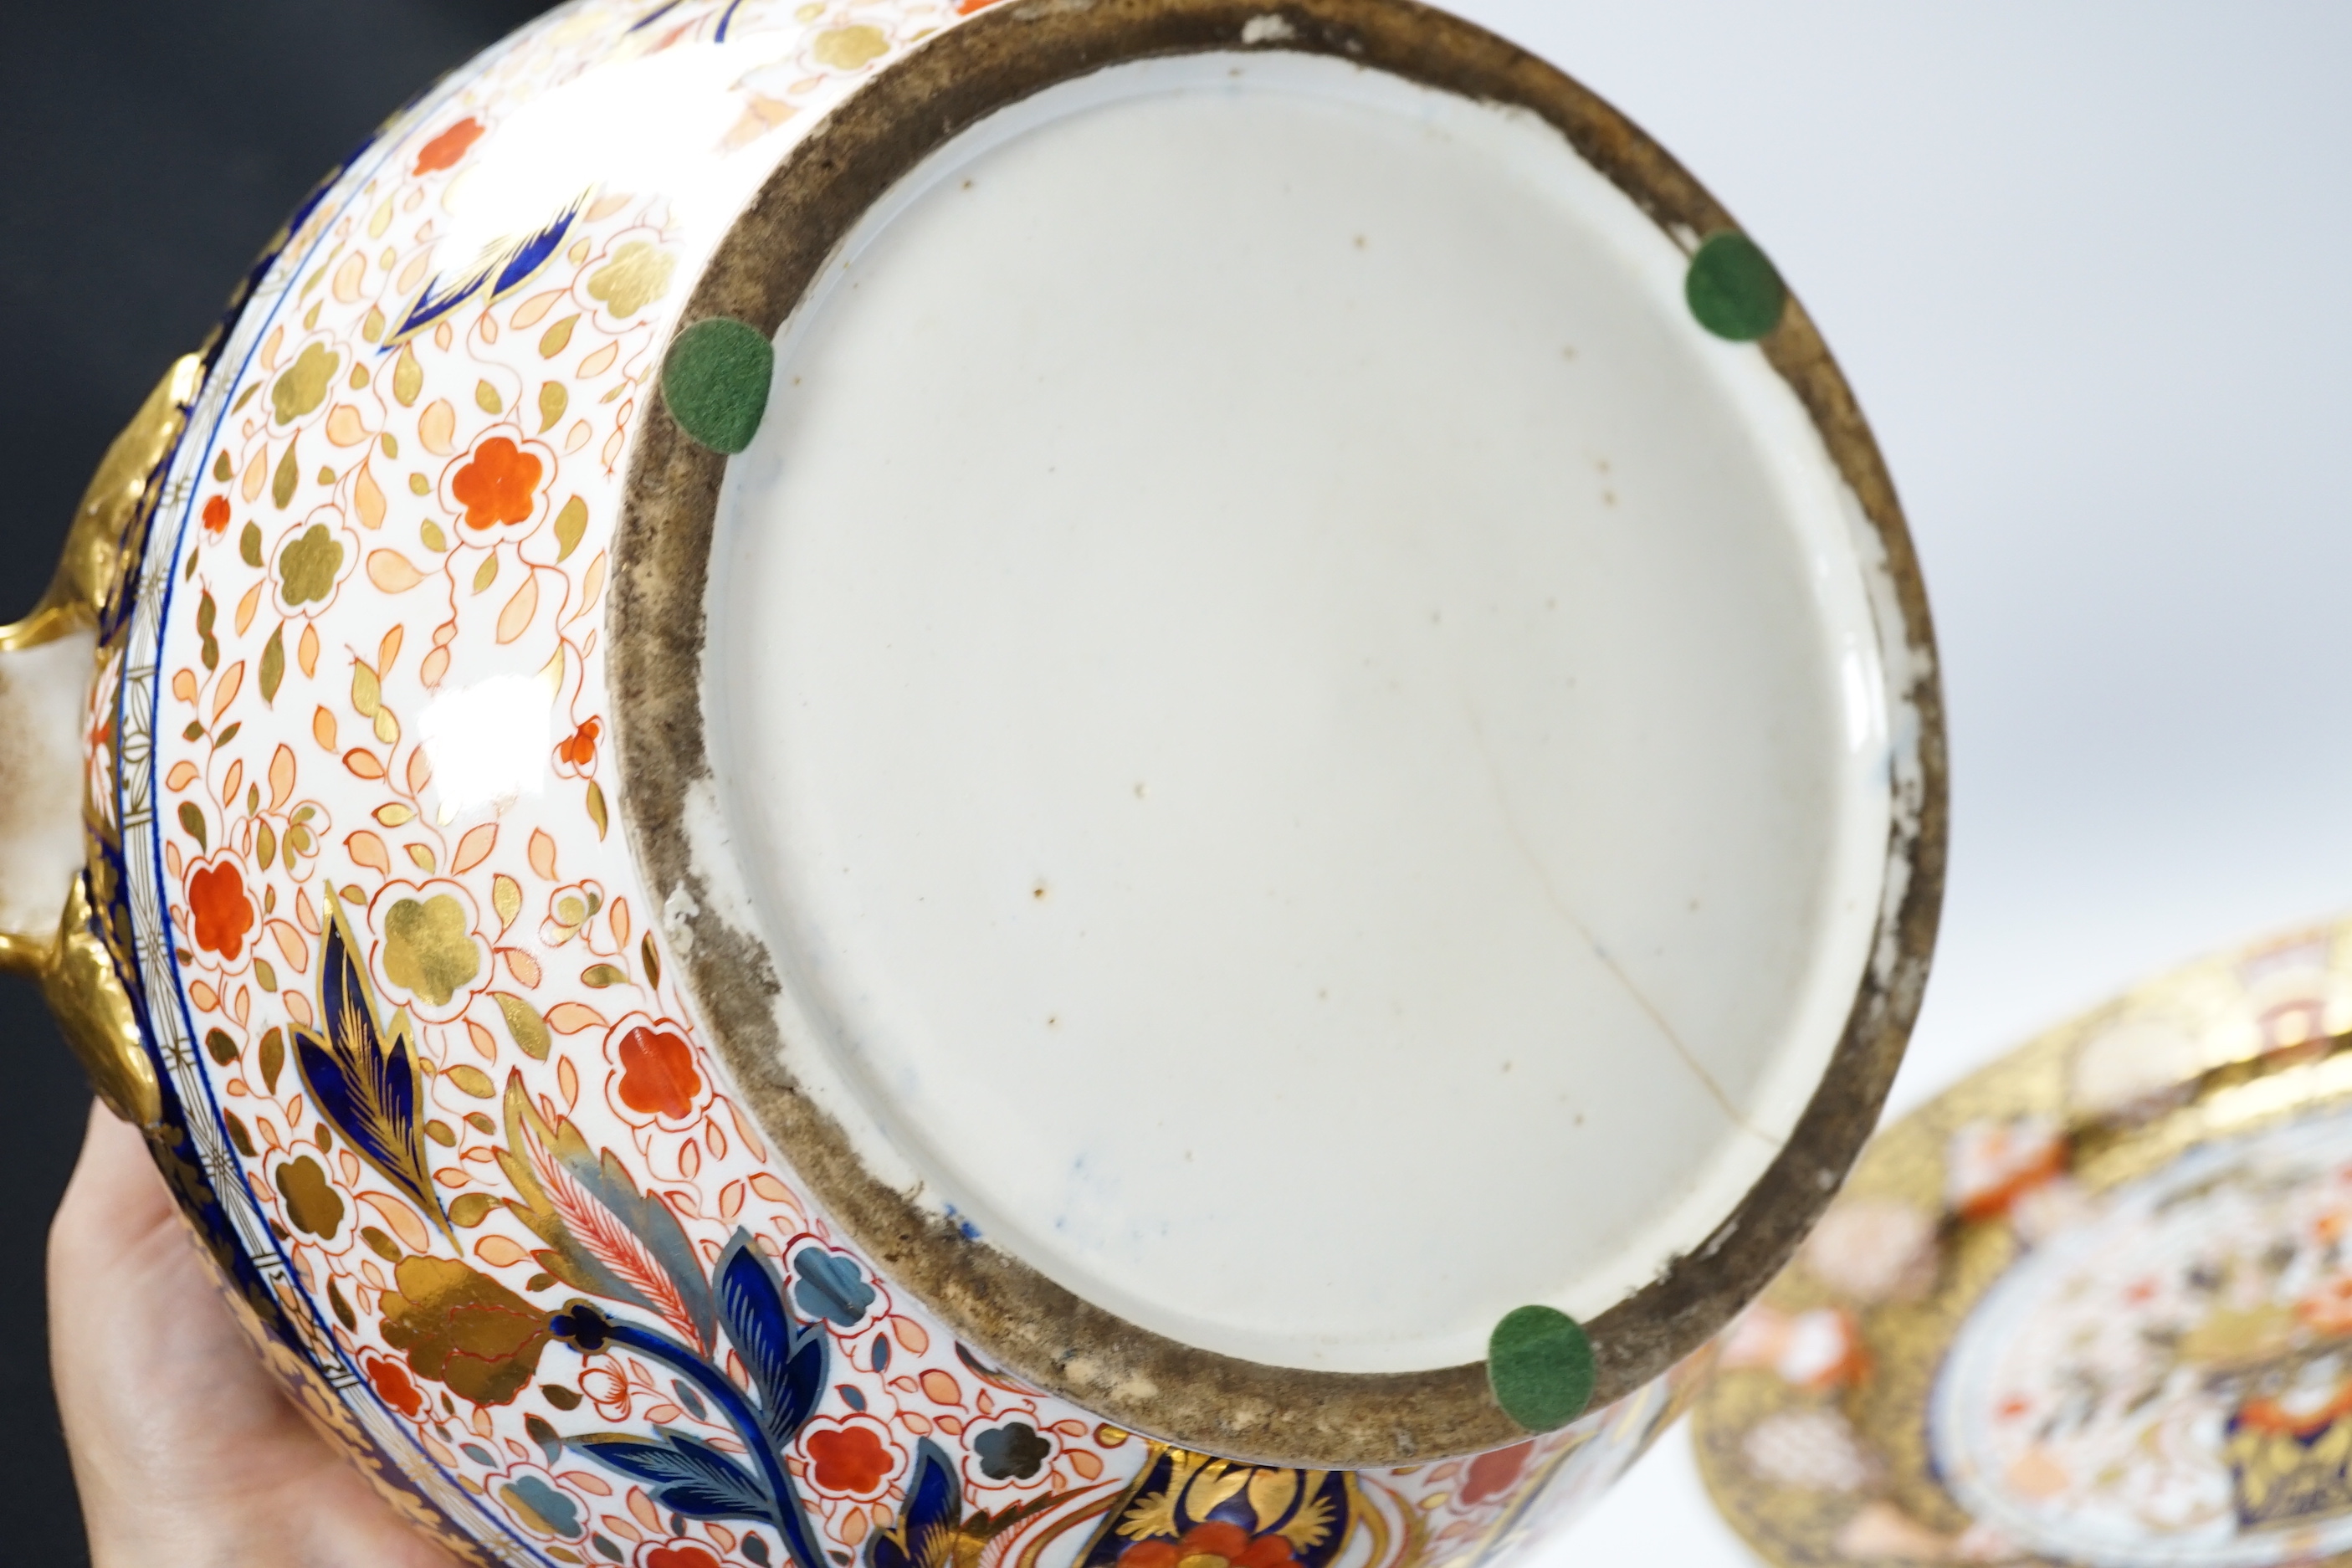 A soup tureen on stand with cover, ‘Japan pattern’, 29cm high - Image 6 of 7